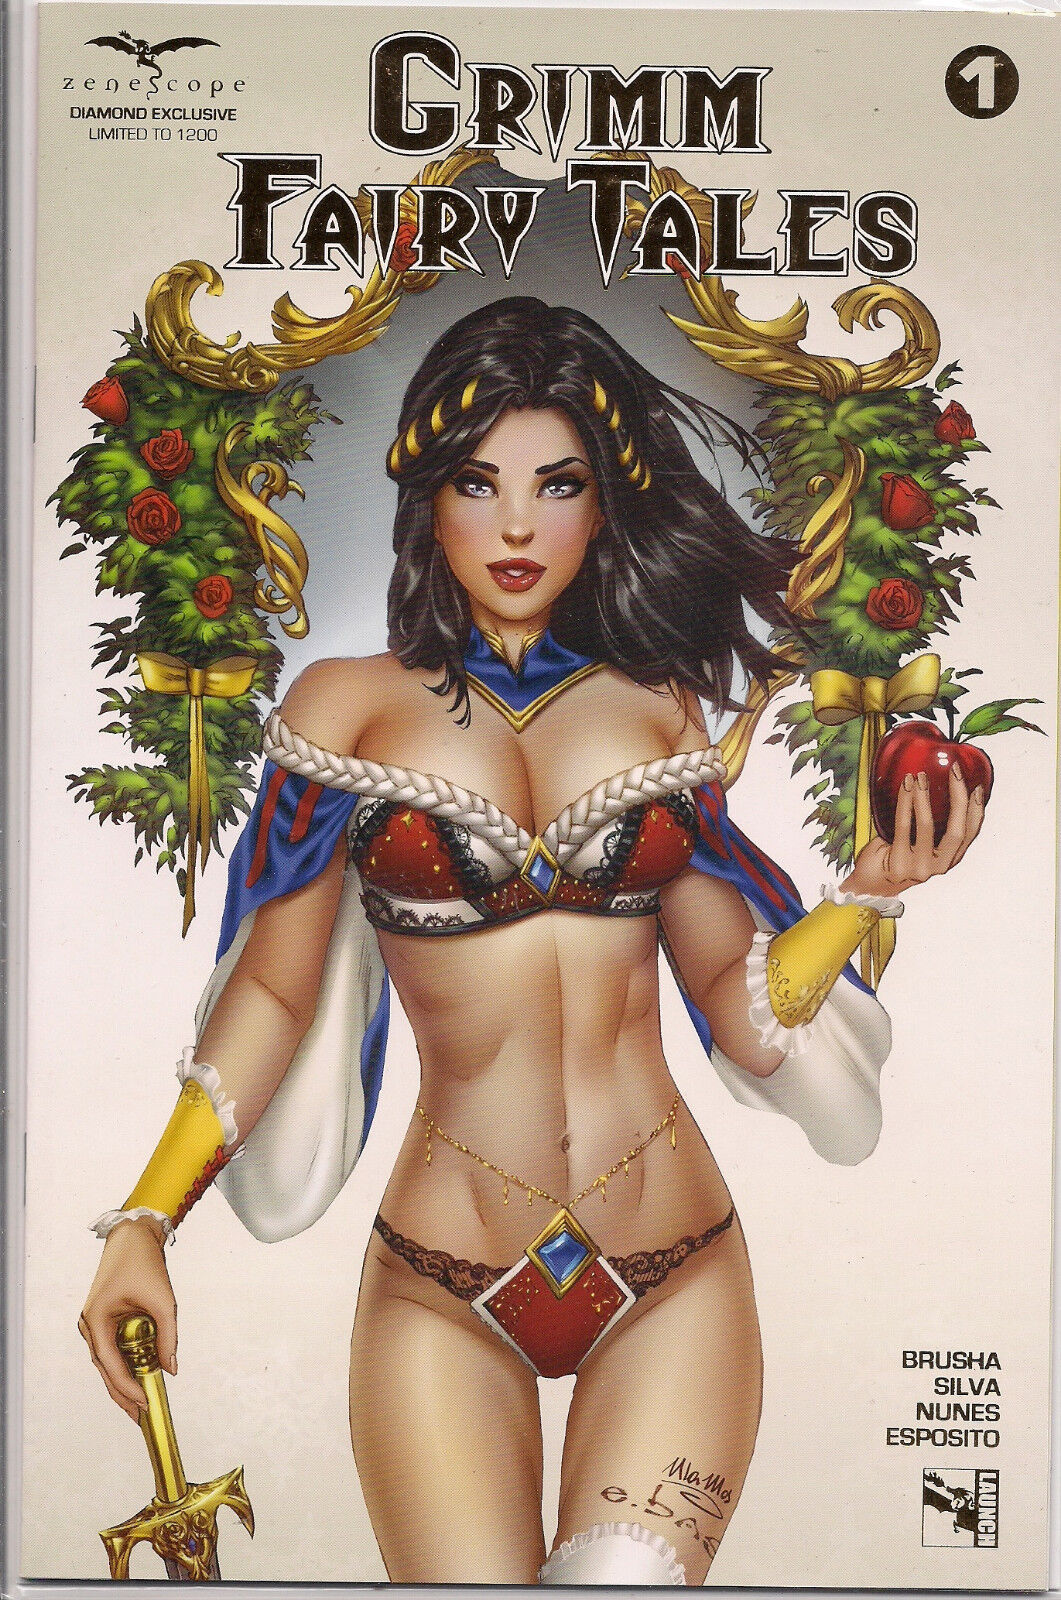 Grimm Fairy Tales vol 2 1 Diamond GOLD FOIL EBAS Exclusive 1 of 1200 NM SOLD OUT